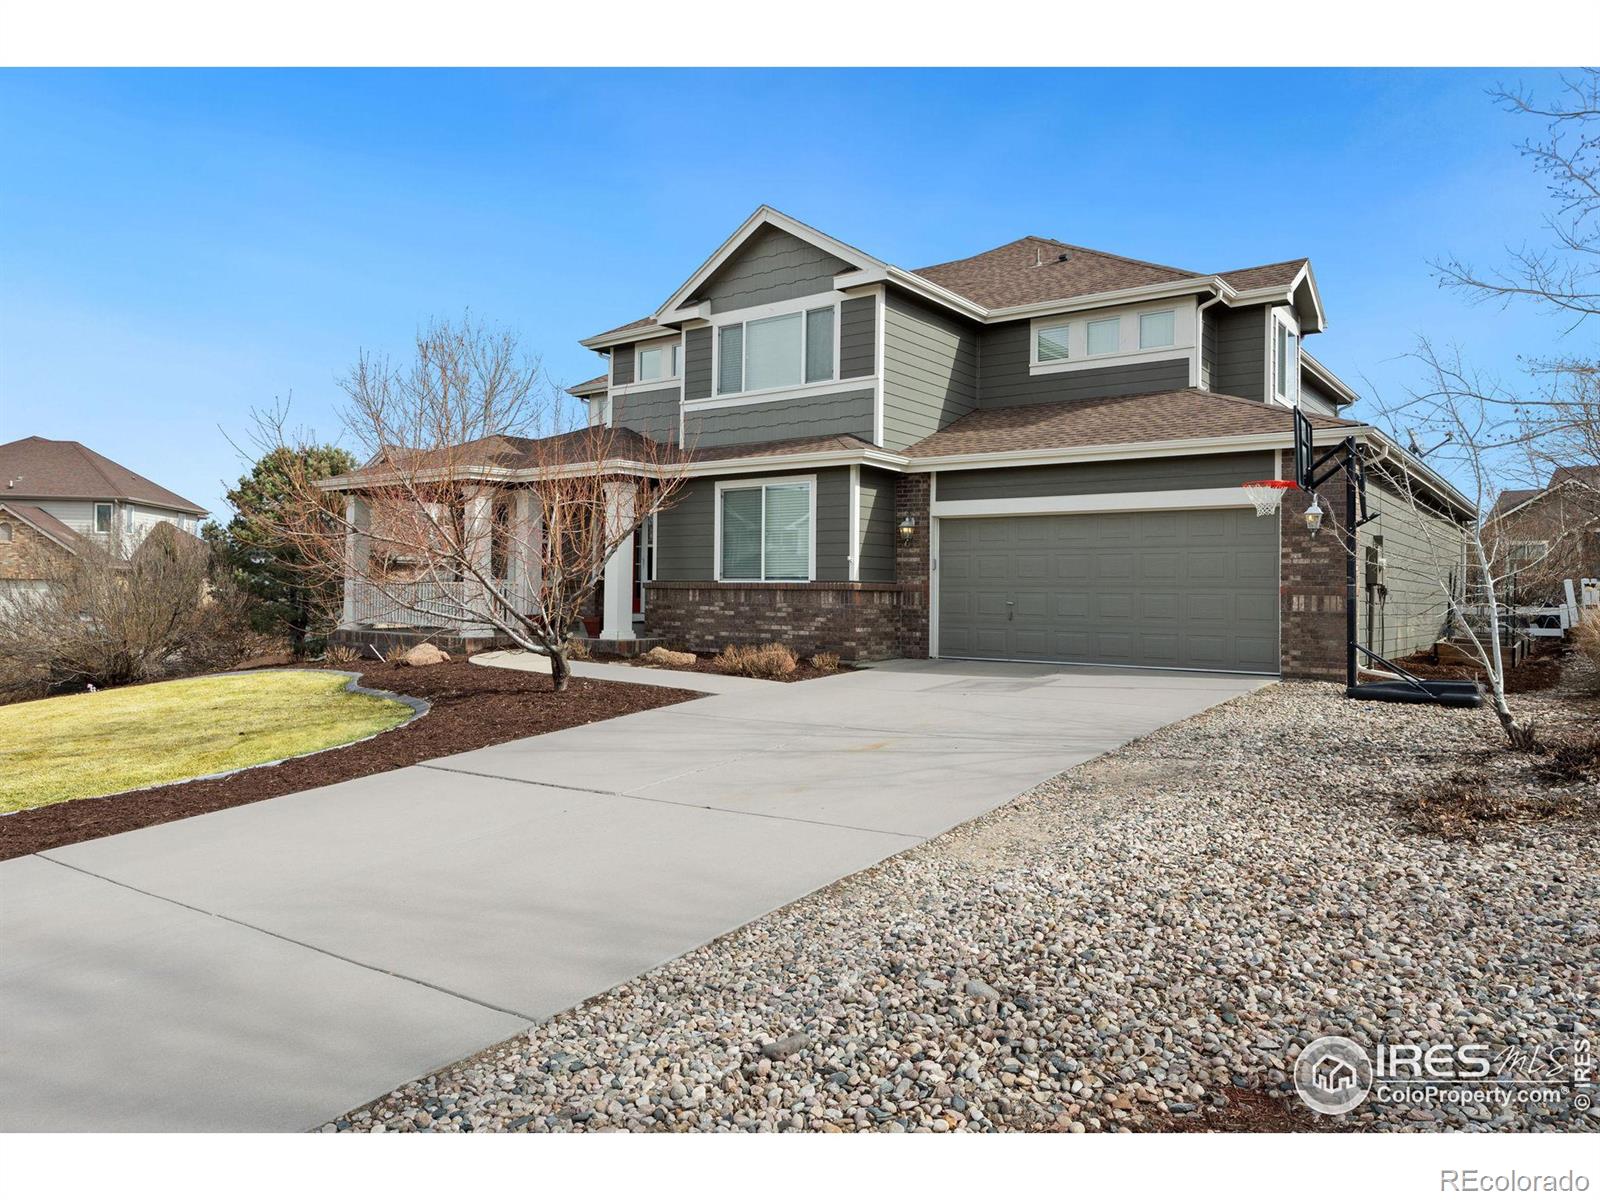 8270  albacore court, Windsor sold home. Closed on 2024-04-30 for $805,000.